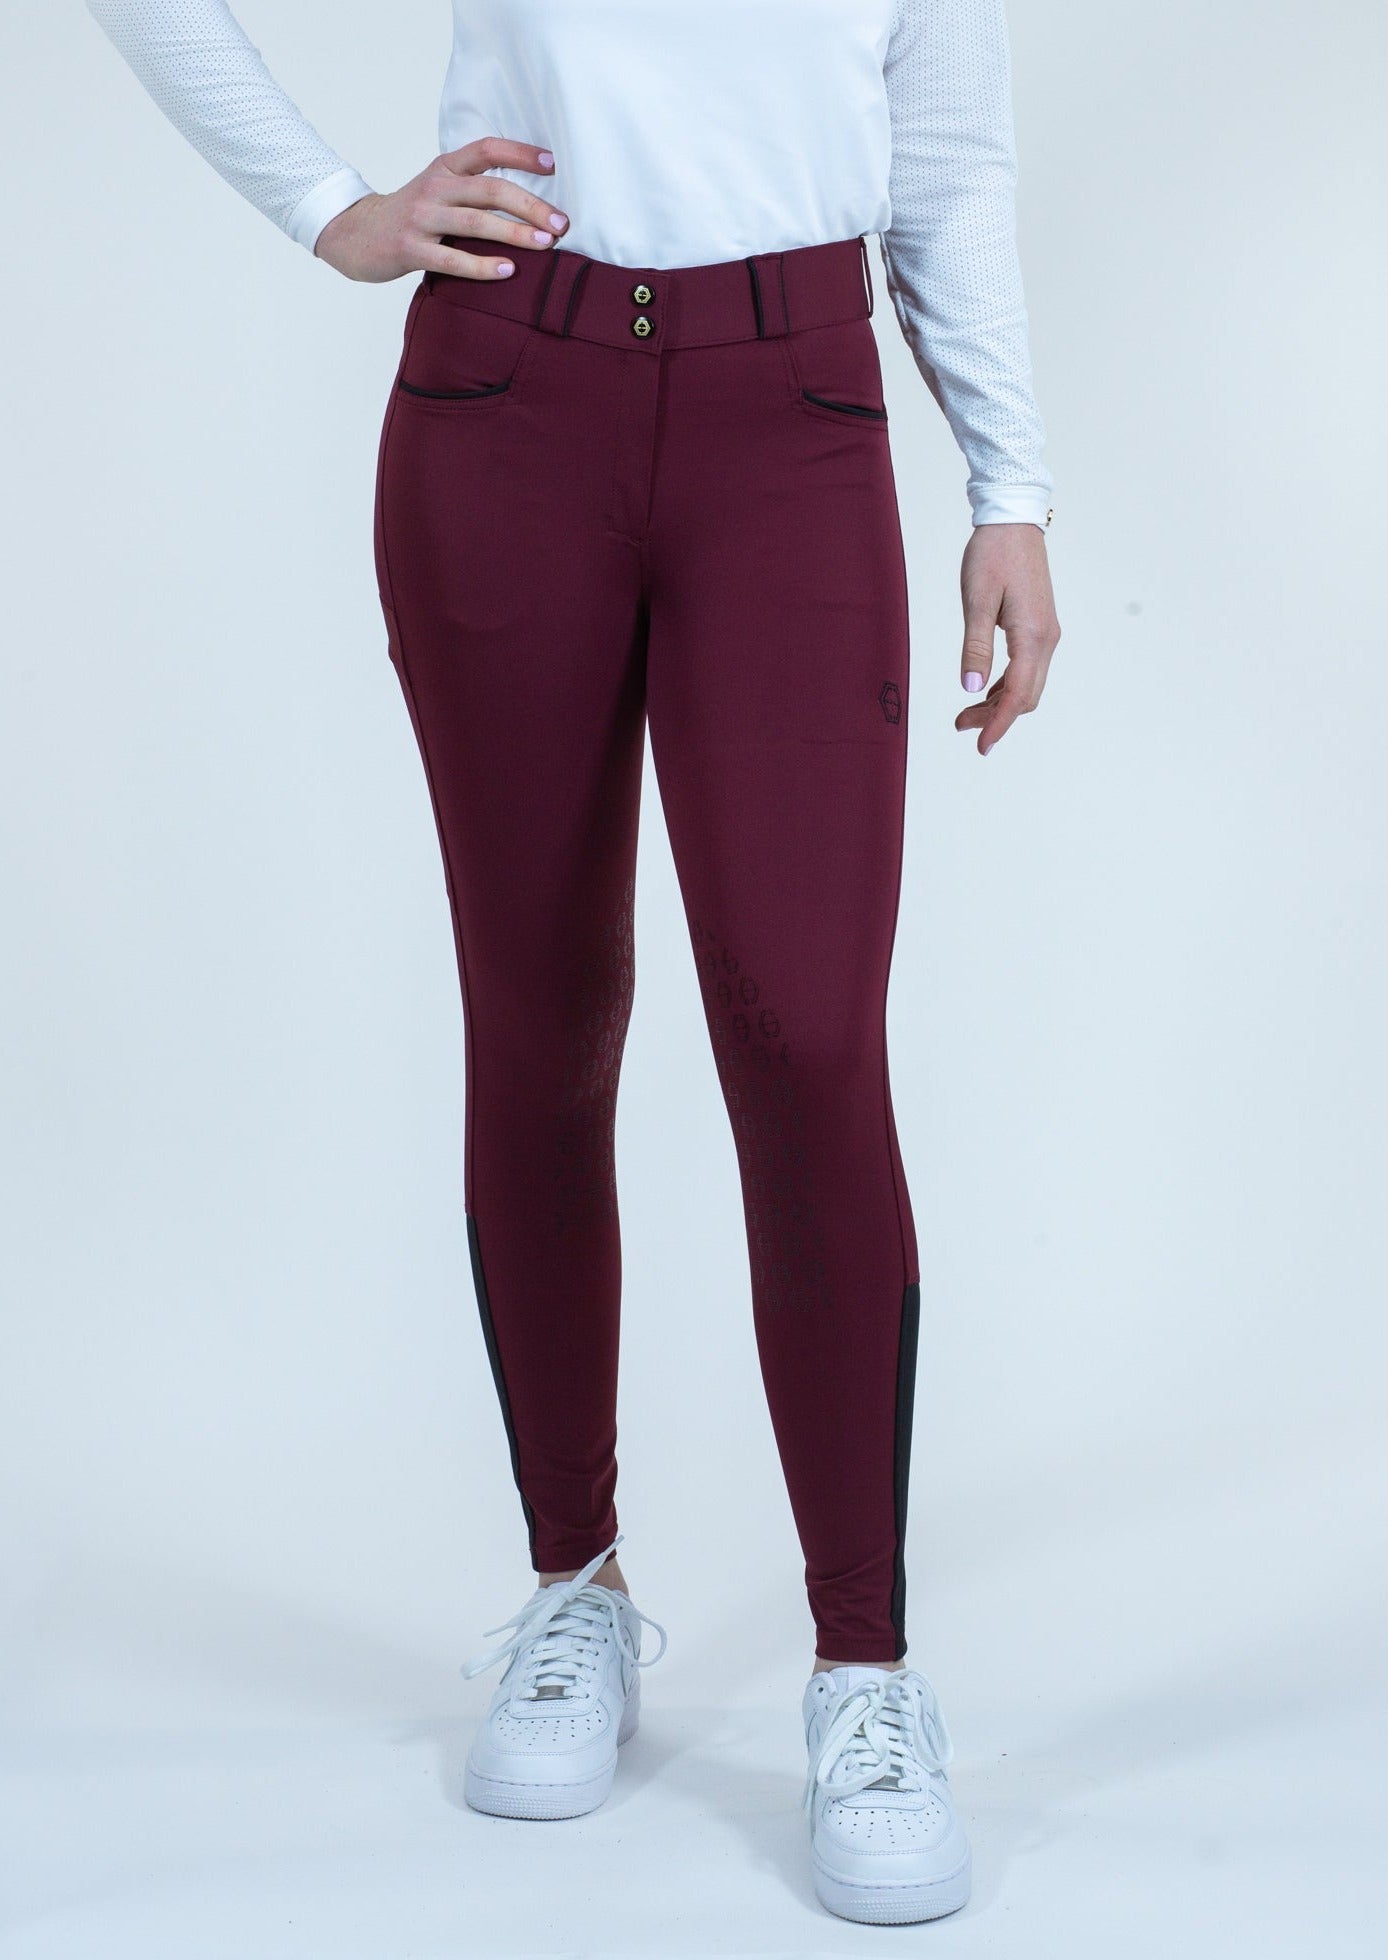 The Logan Breech Knee Patch in Cranberry